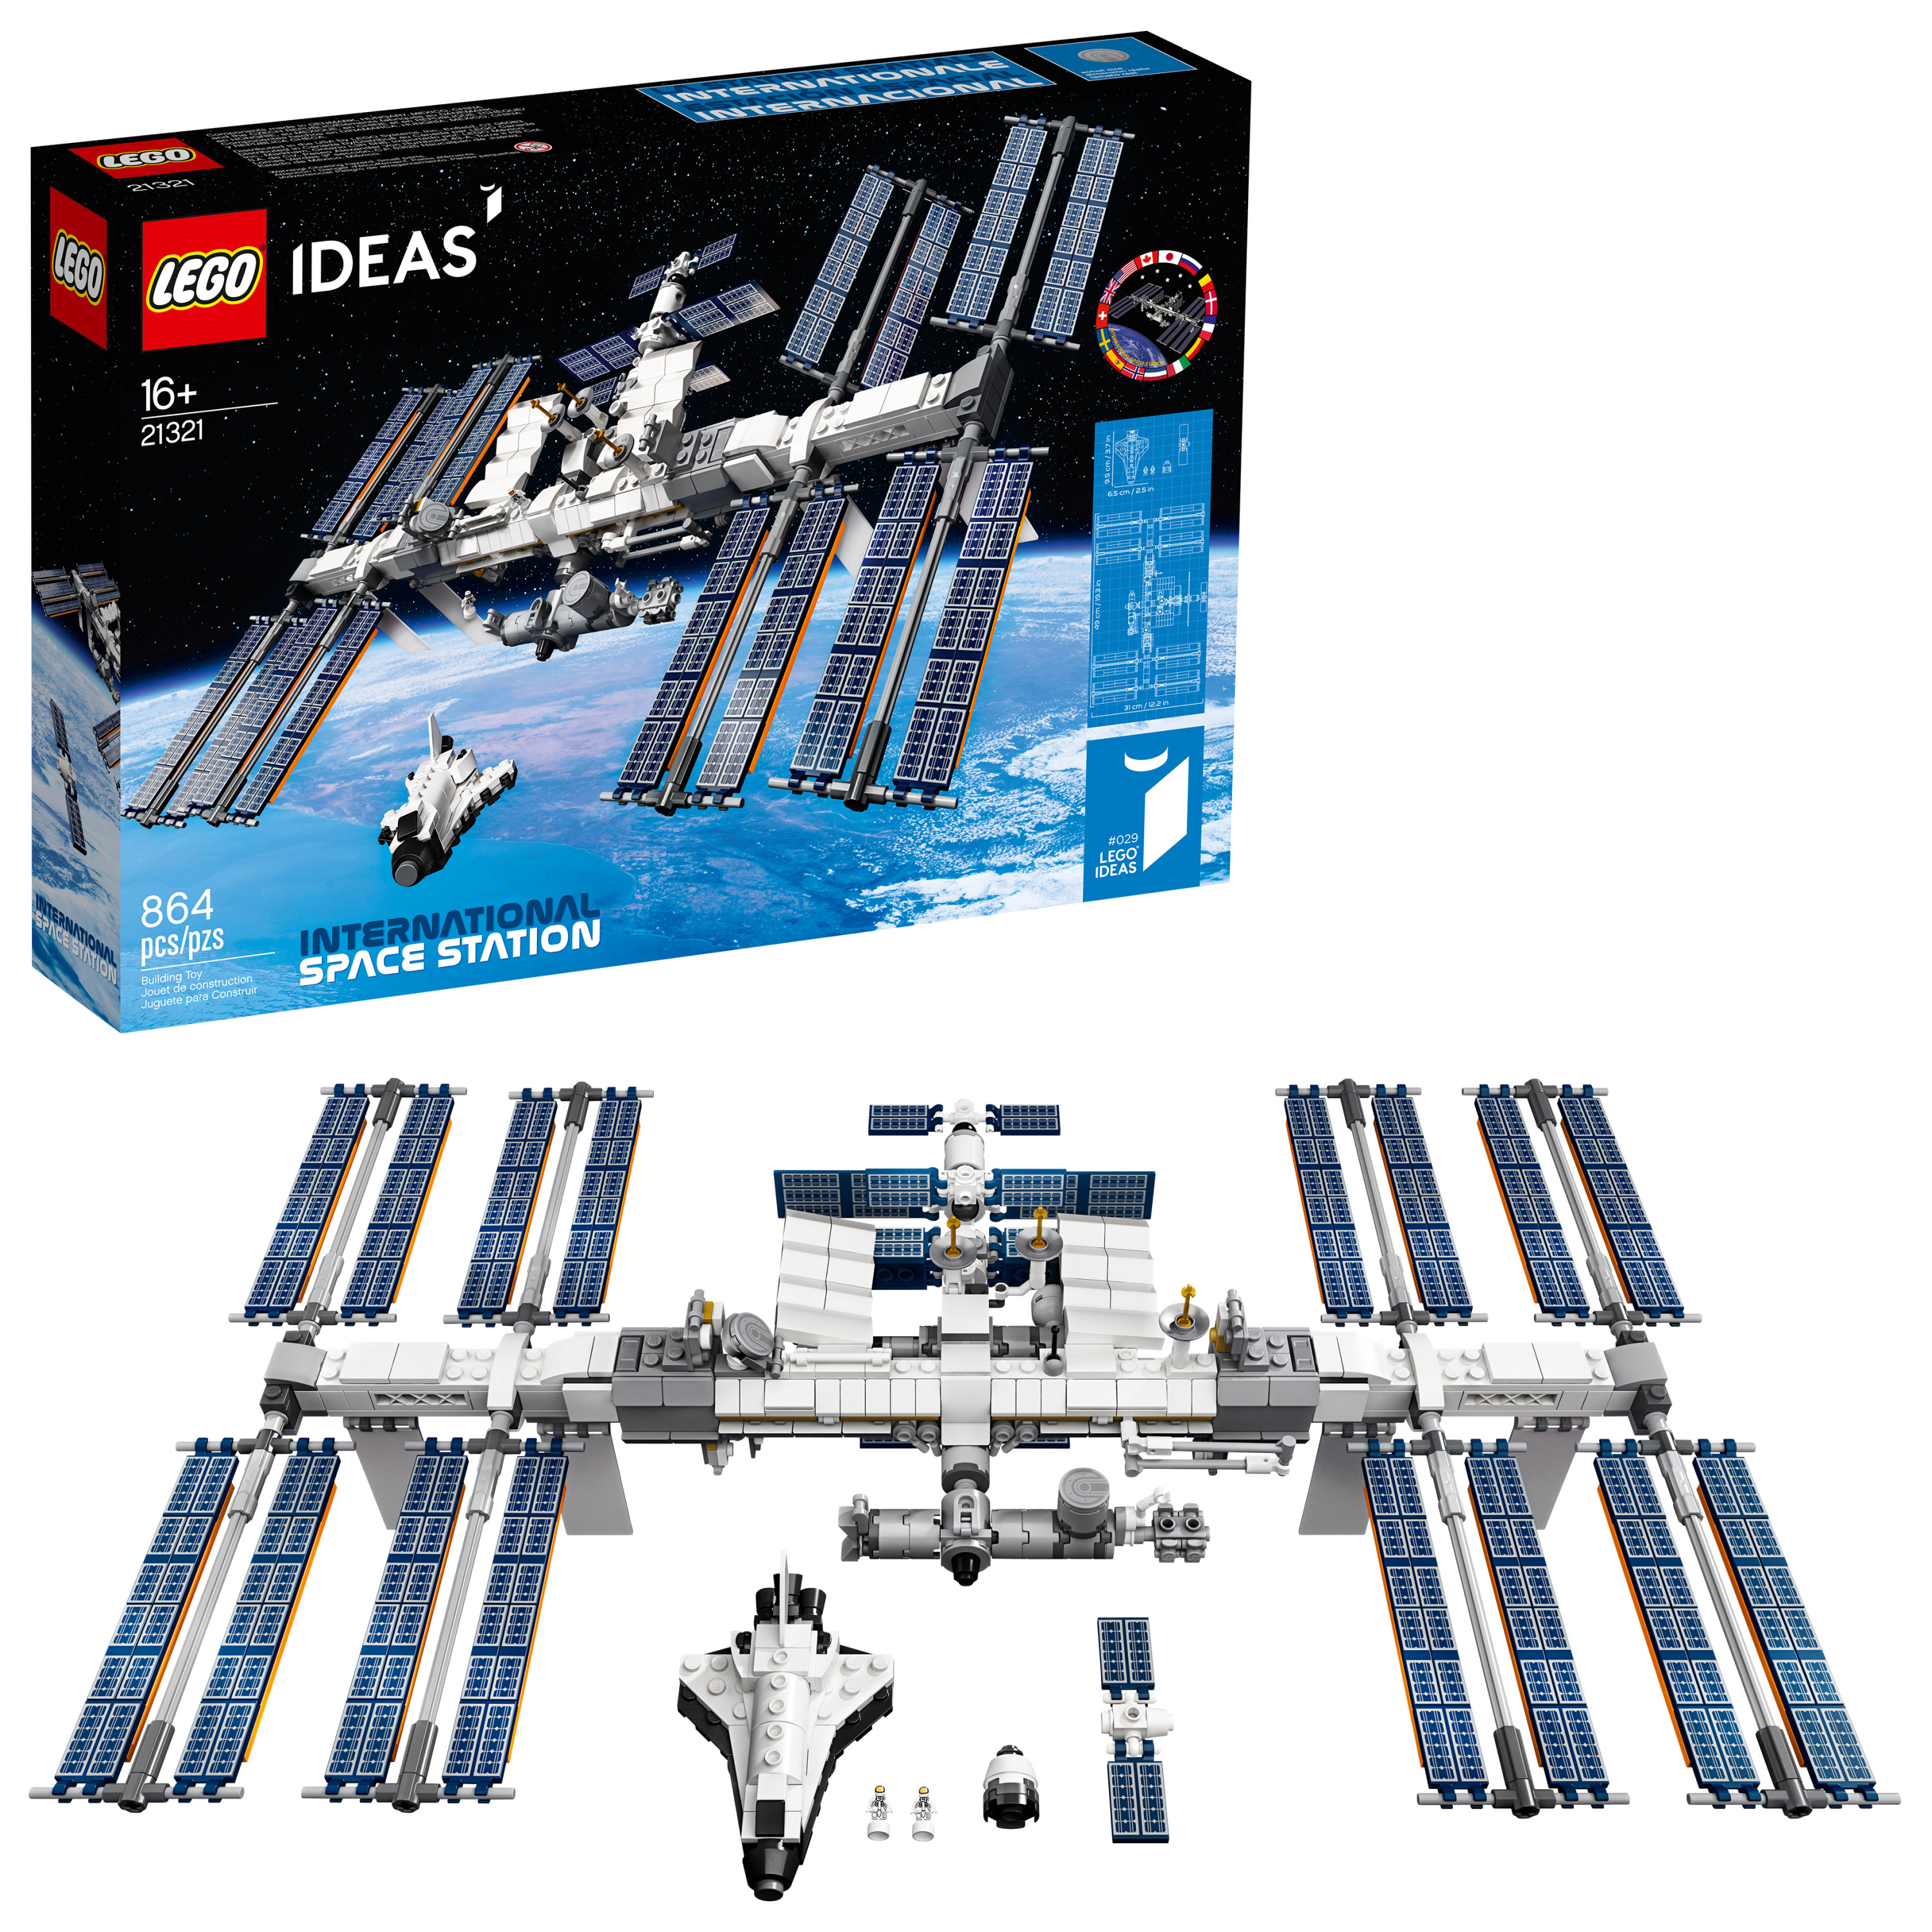 LEGO Ideas International Space Station 21321 Building Kit, Adult LEGO Set for Display (864 Pieces) - image 1 of 7